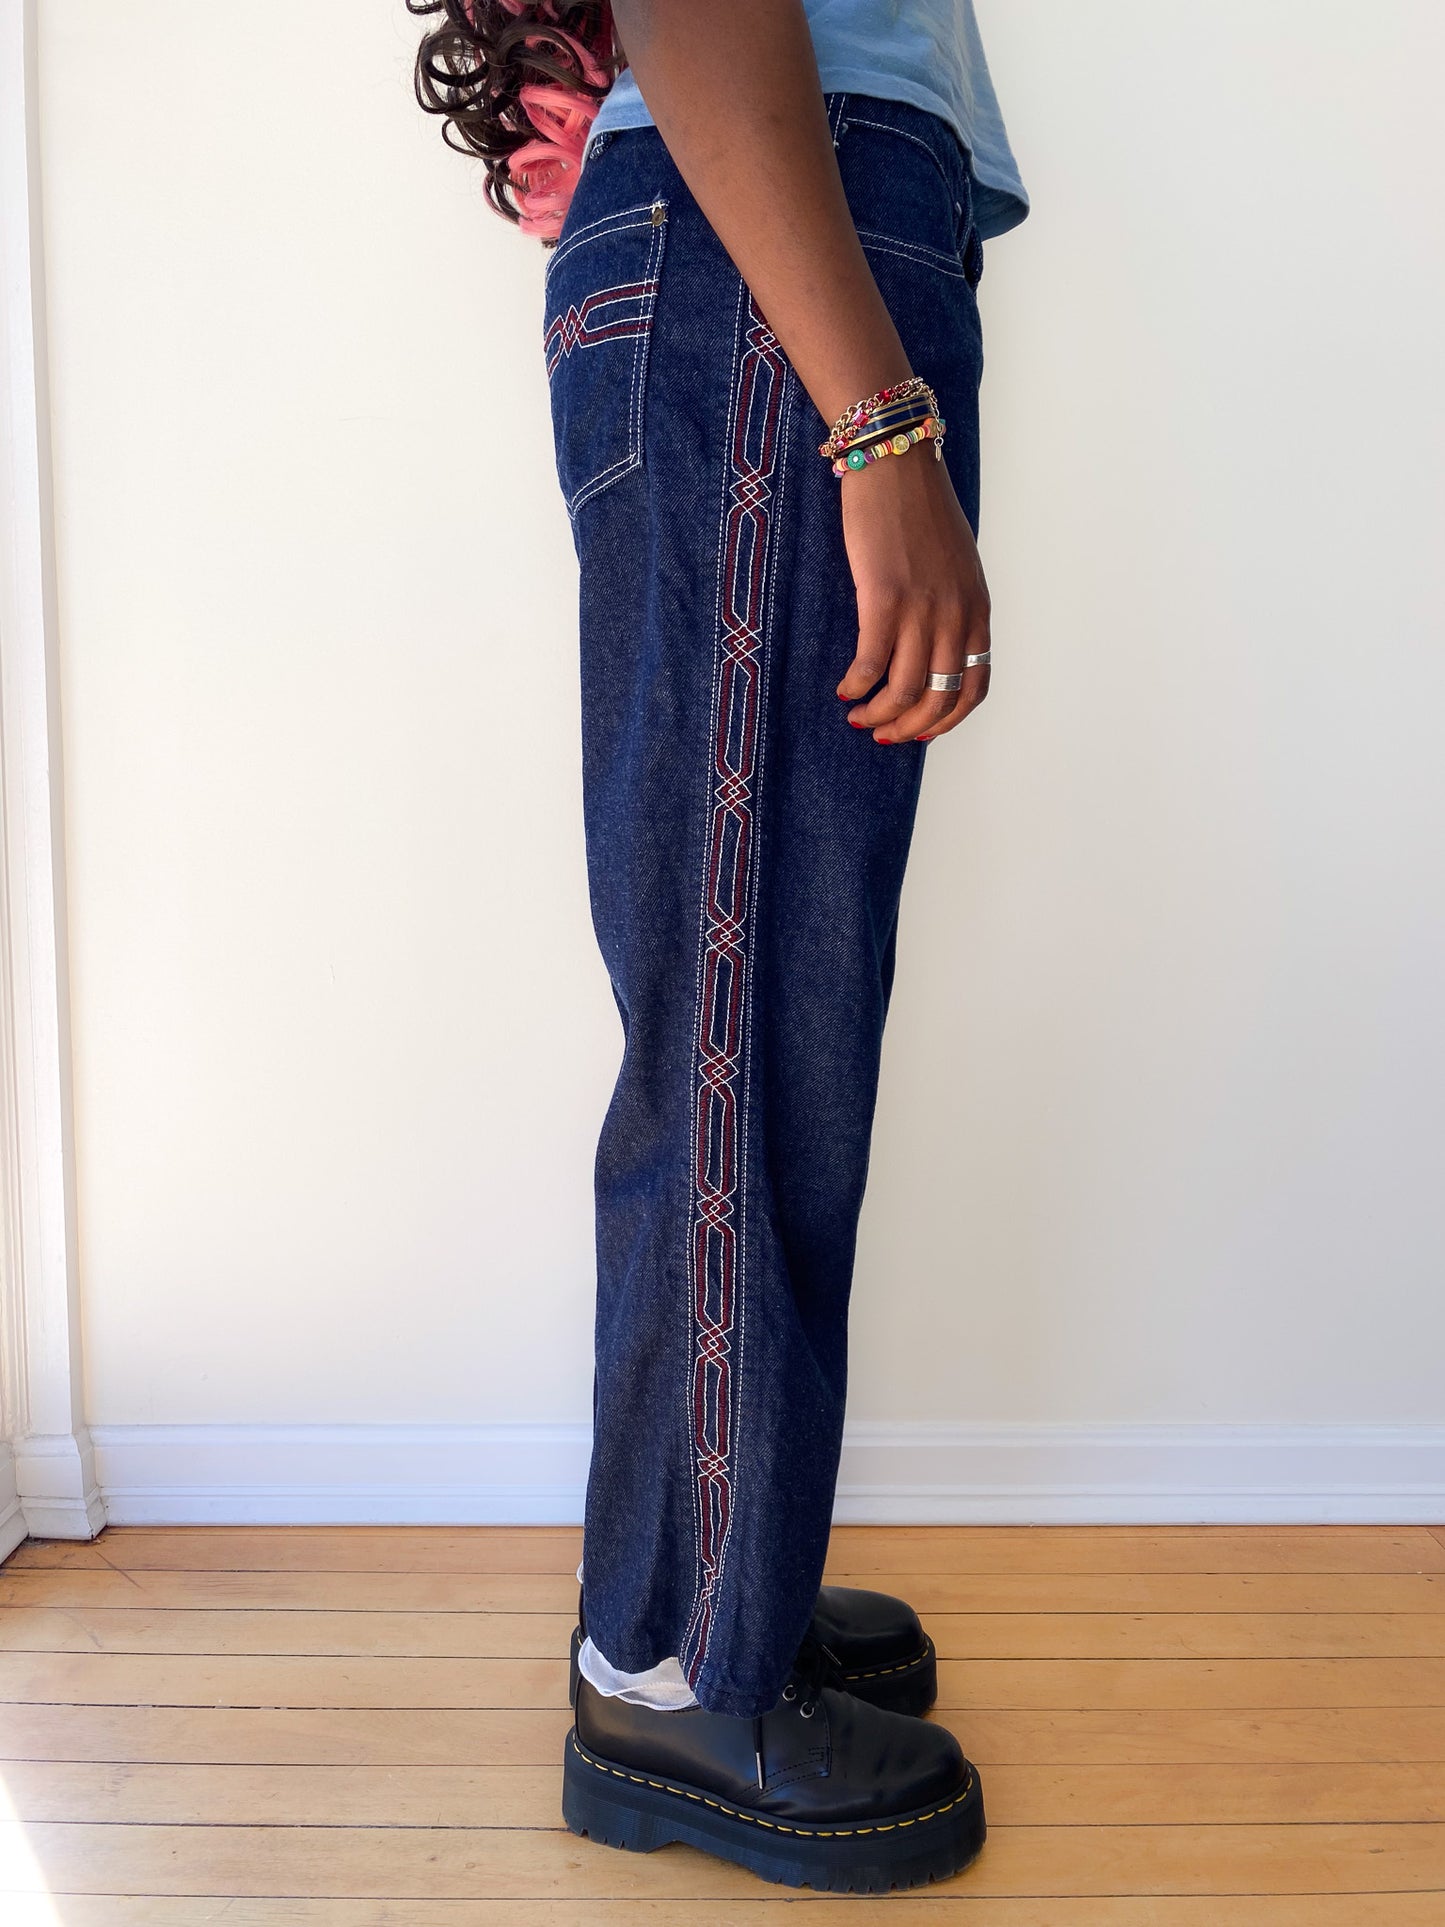 Red Side Seam Jeans—[34x28]